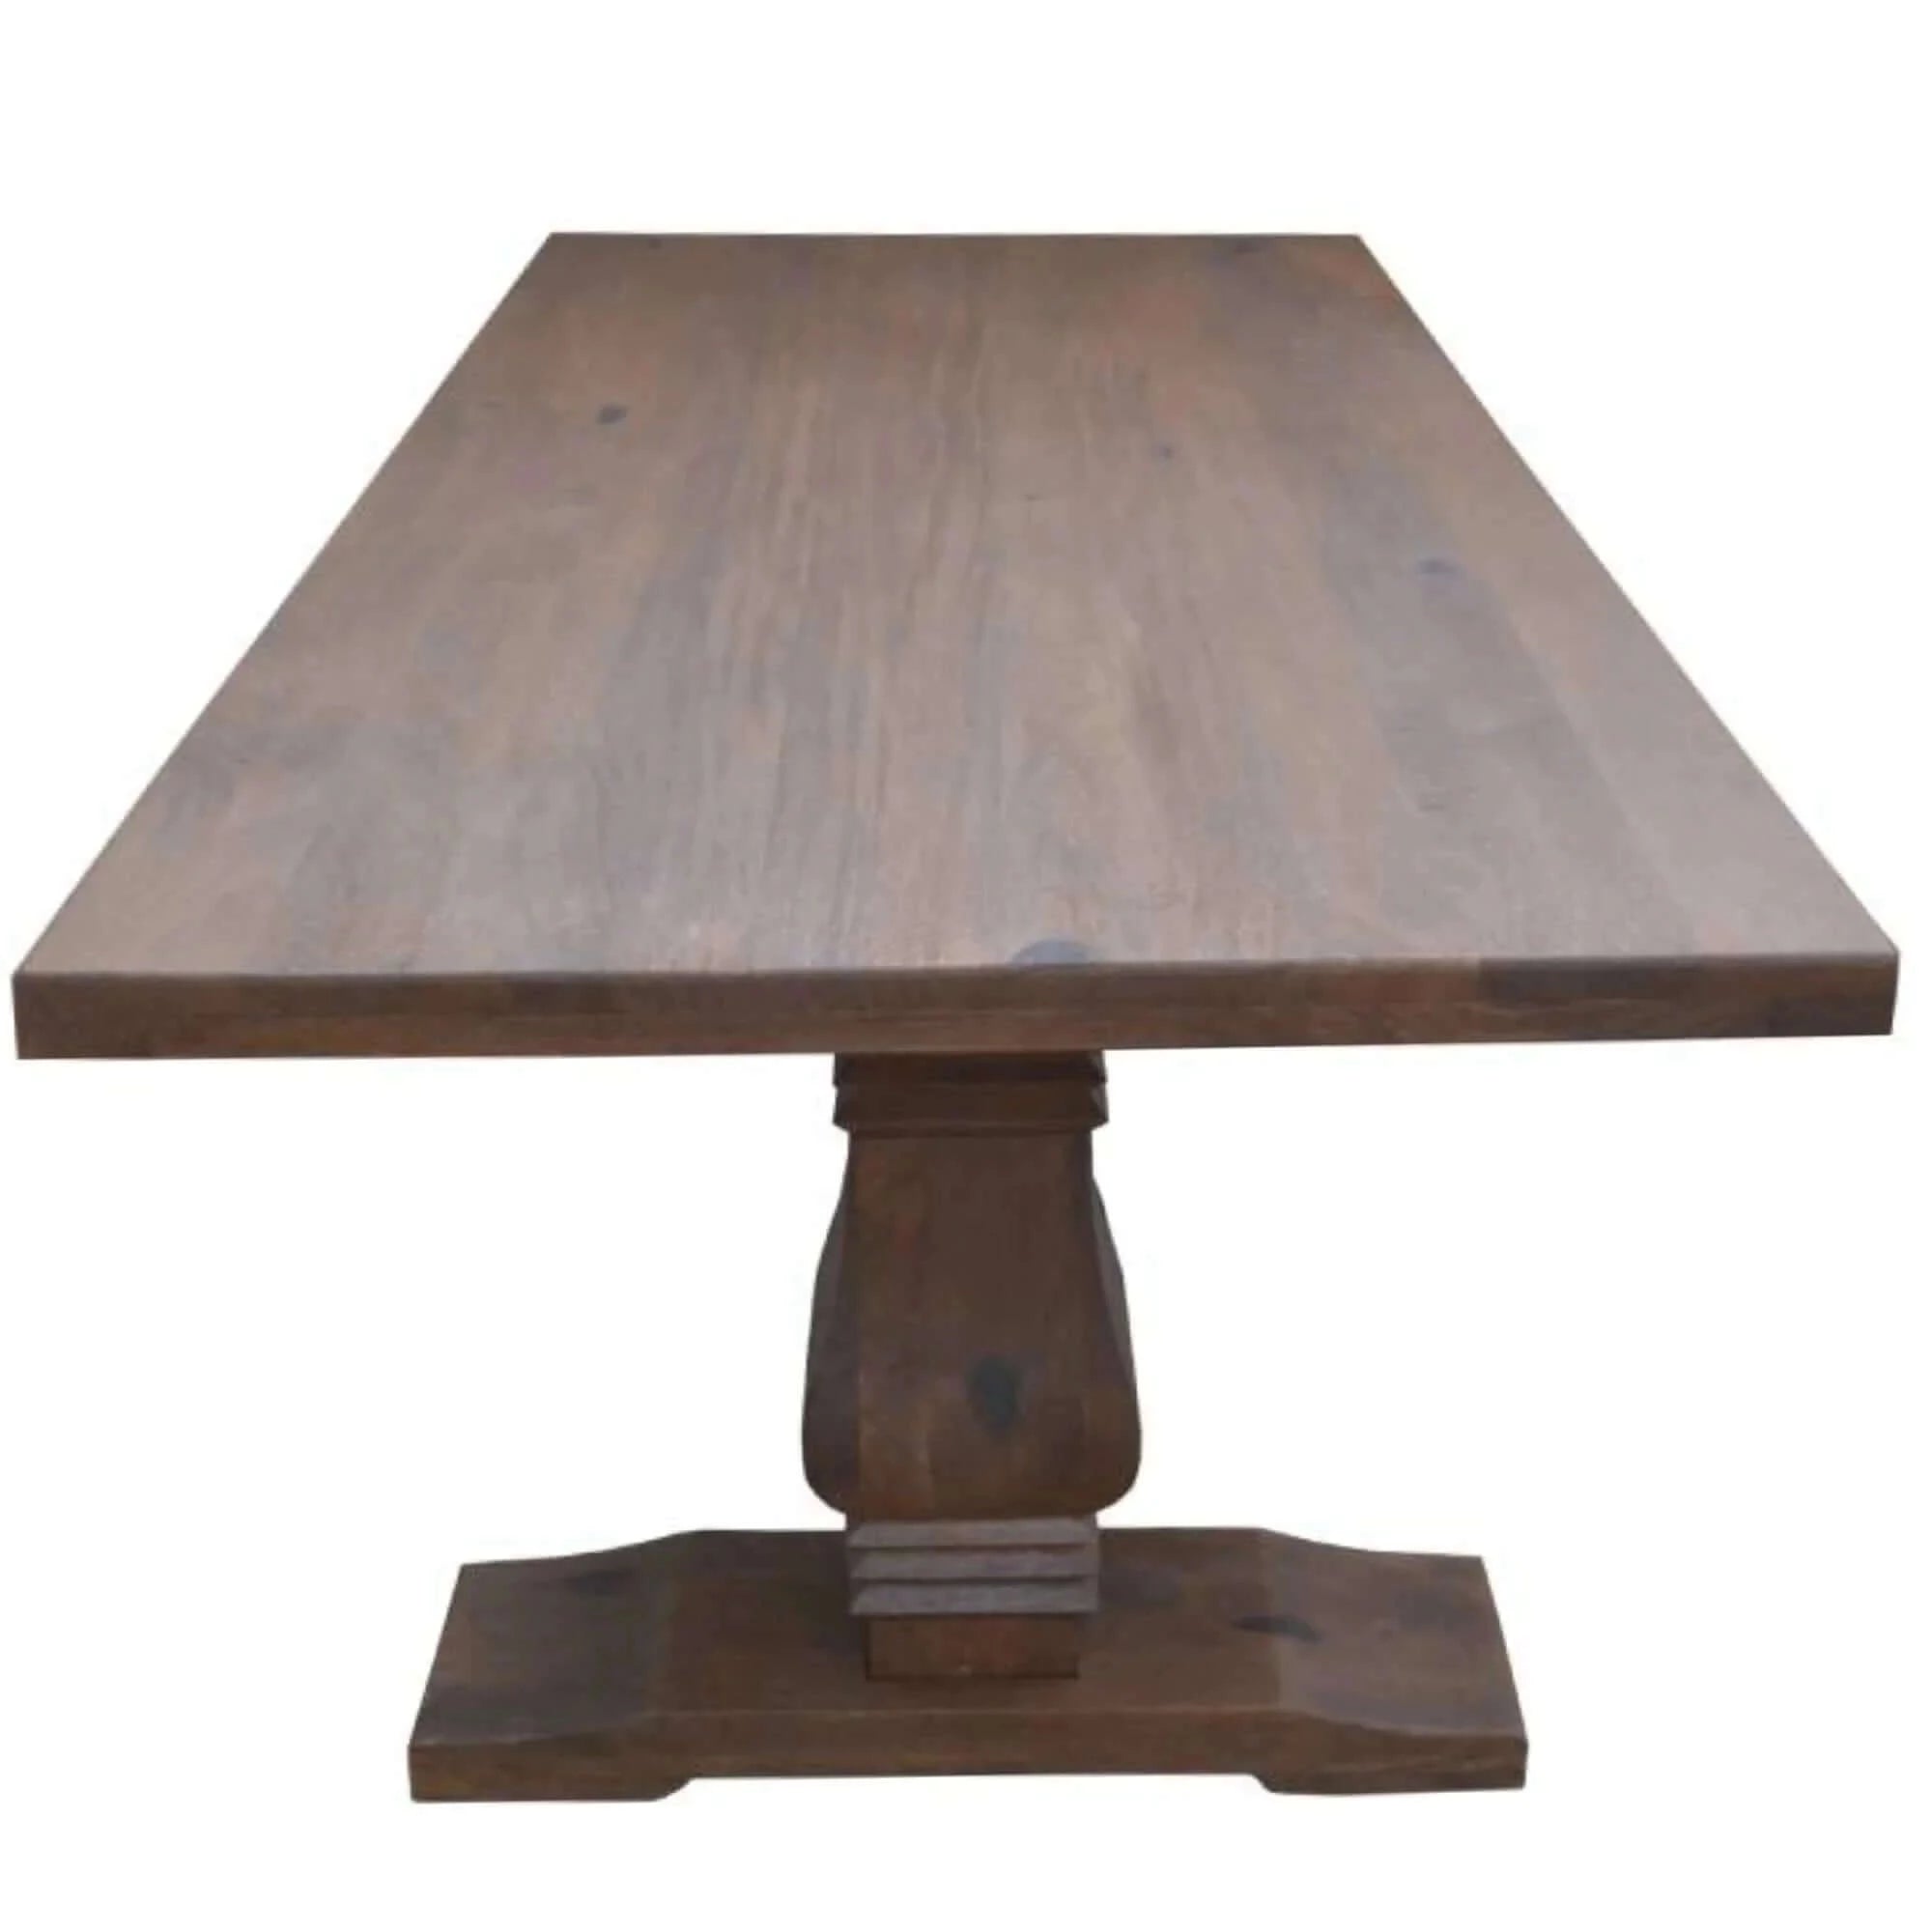 Buy florence dining table 230cm french provincial pedestal solid timber wood - upinteriors-Upinteriors